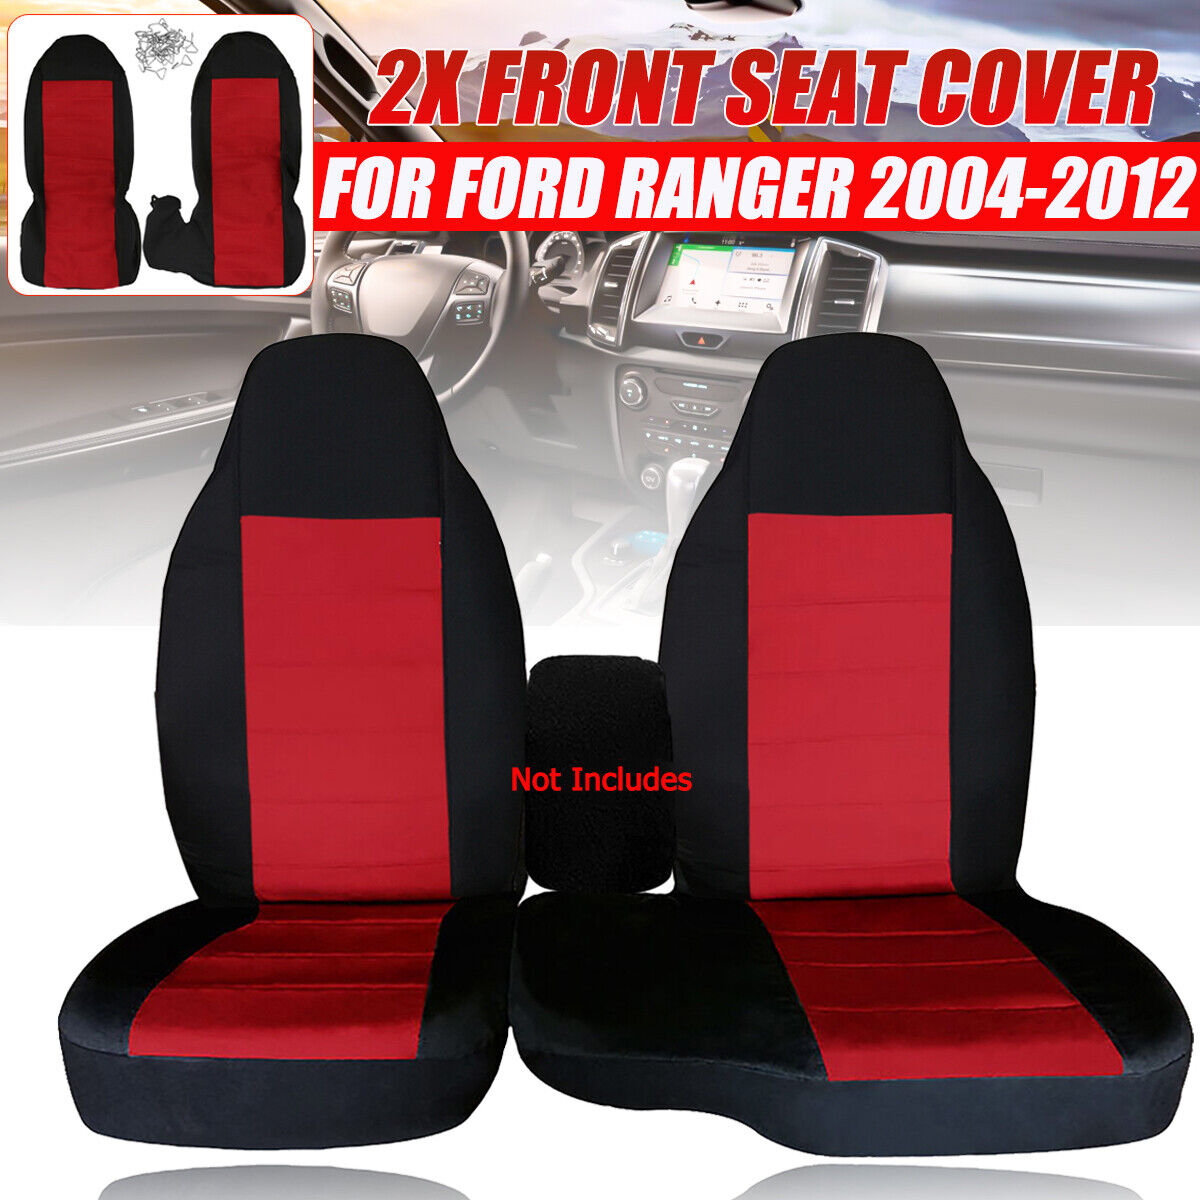 Fits 2004-2012 FORD RANGER 60/40 HIBACK CAR SEAT COVERS RED